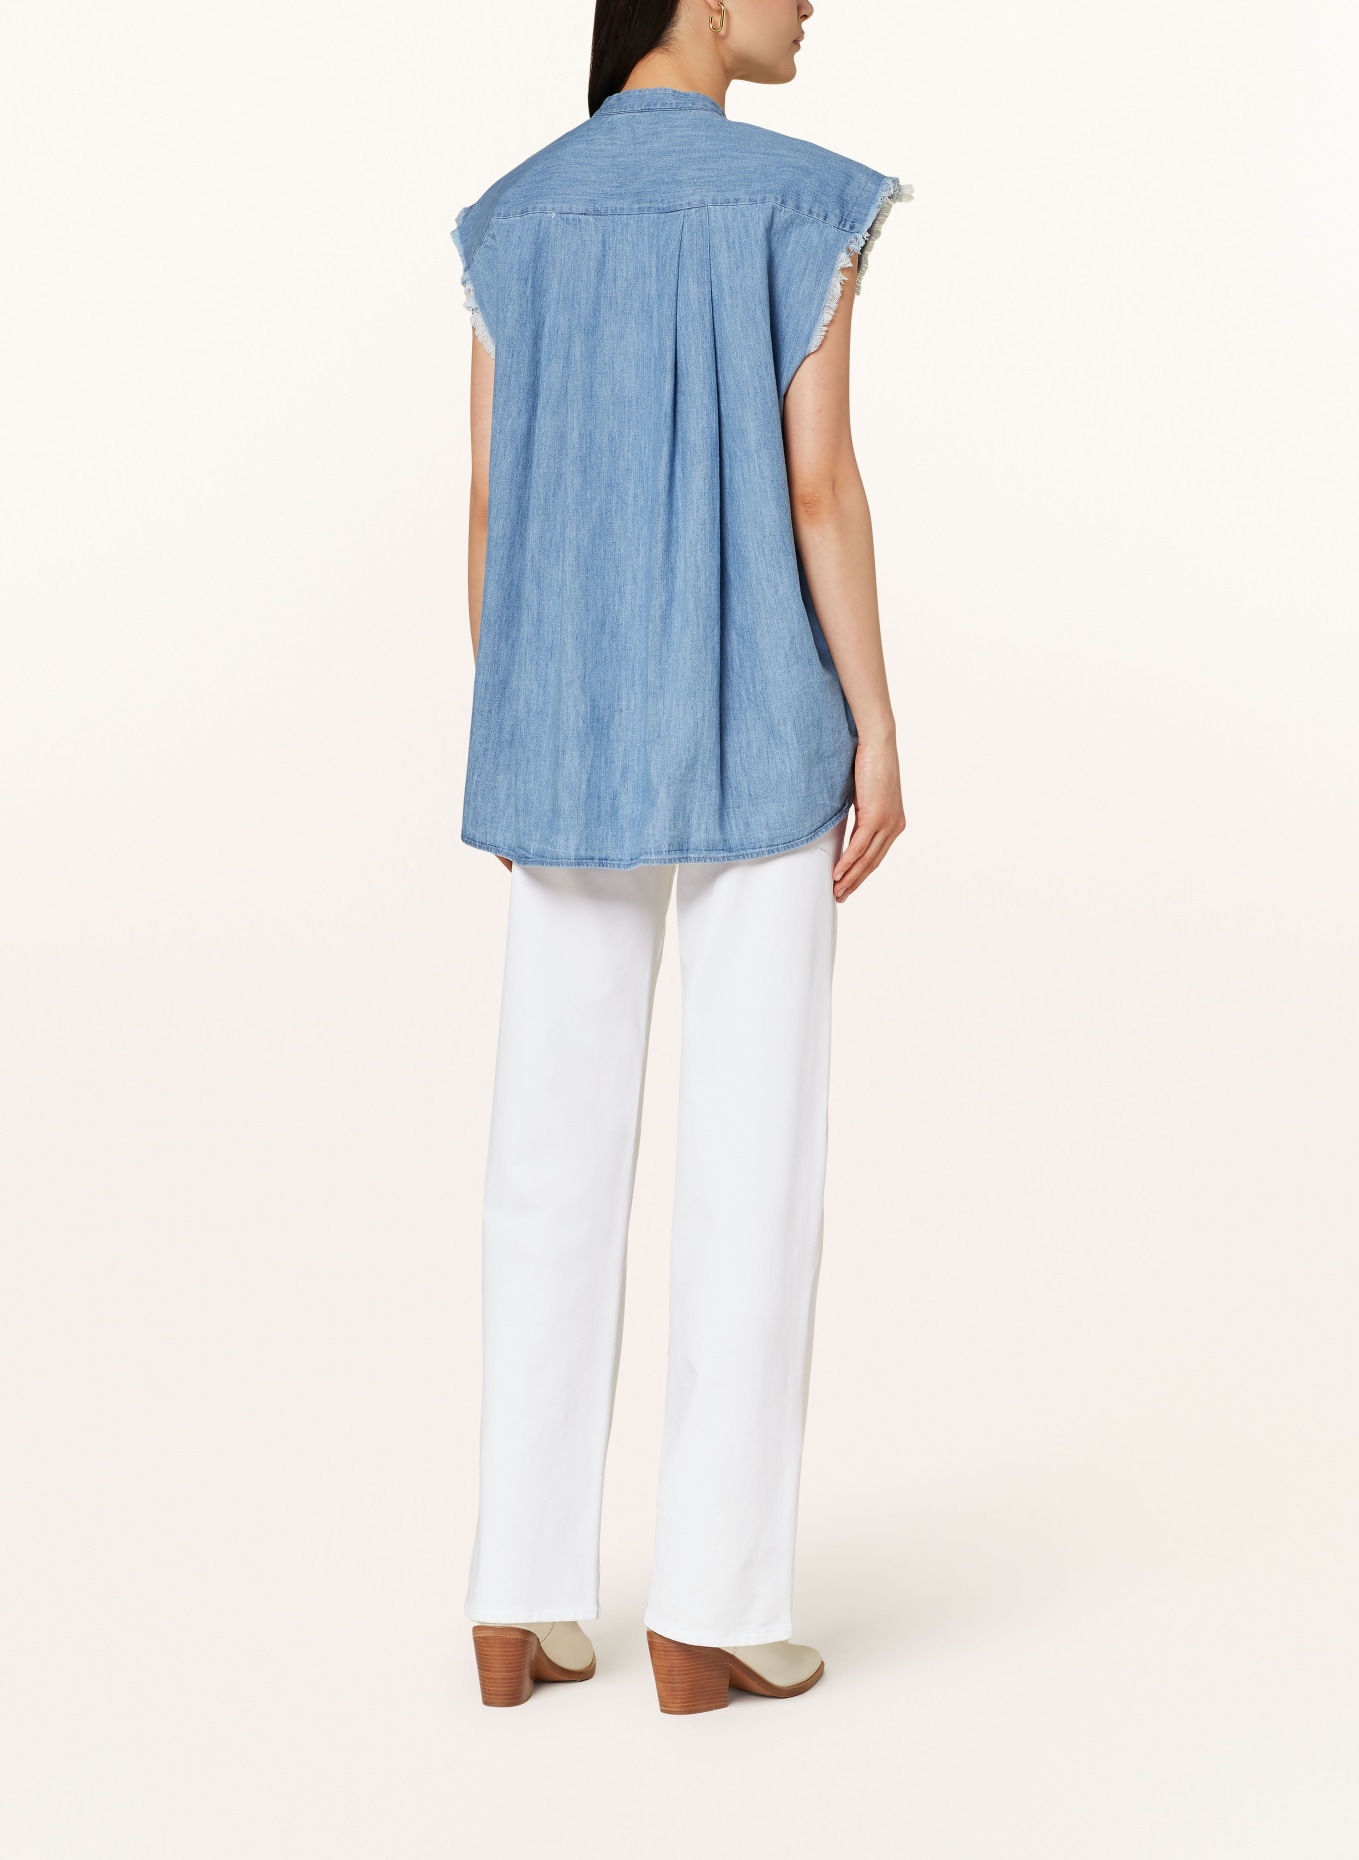 SoSUE Blouse top BARCELONA with ruffles, Color: BLUE (Image 3)